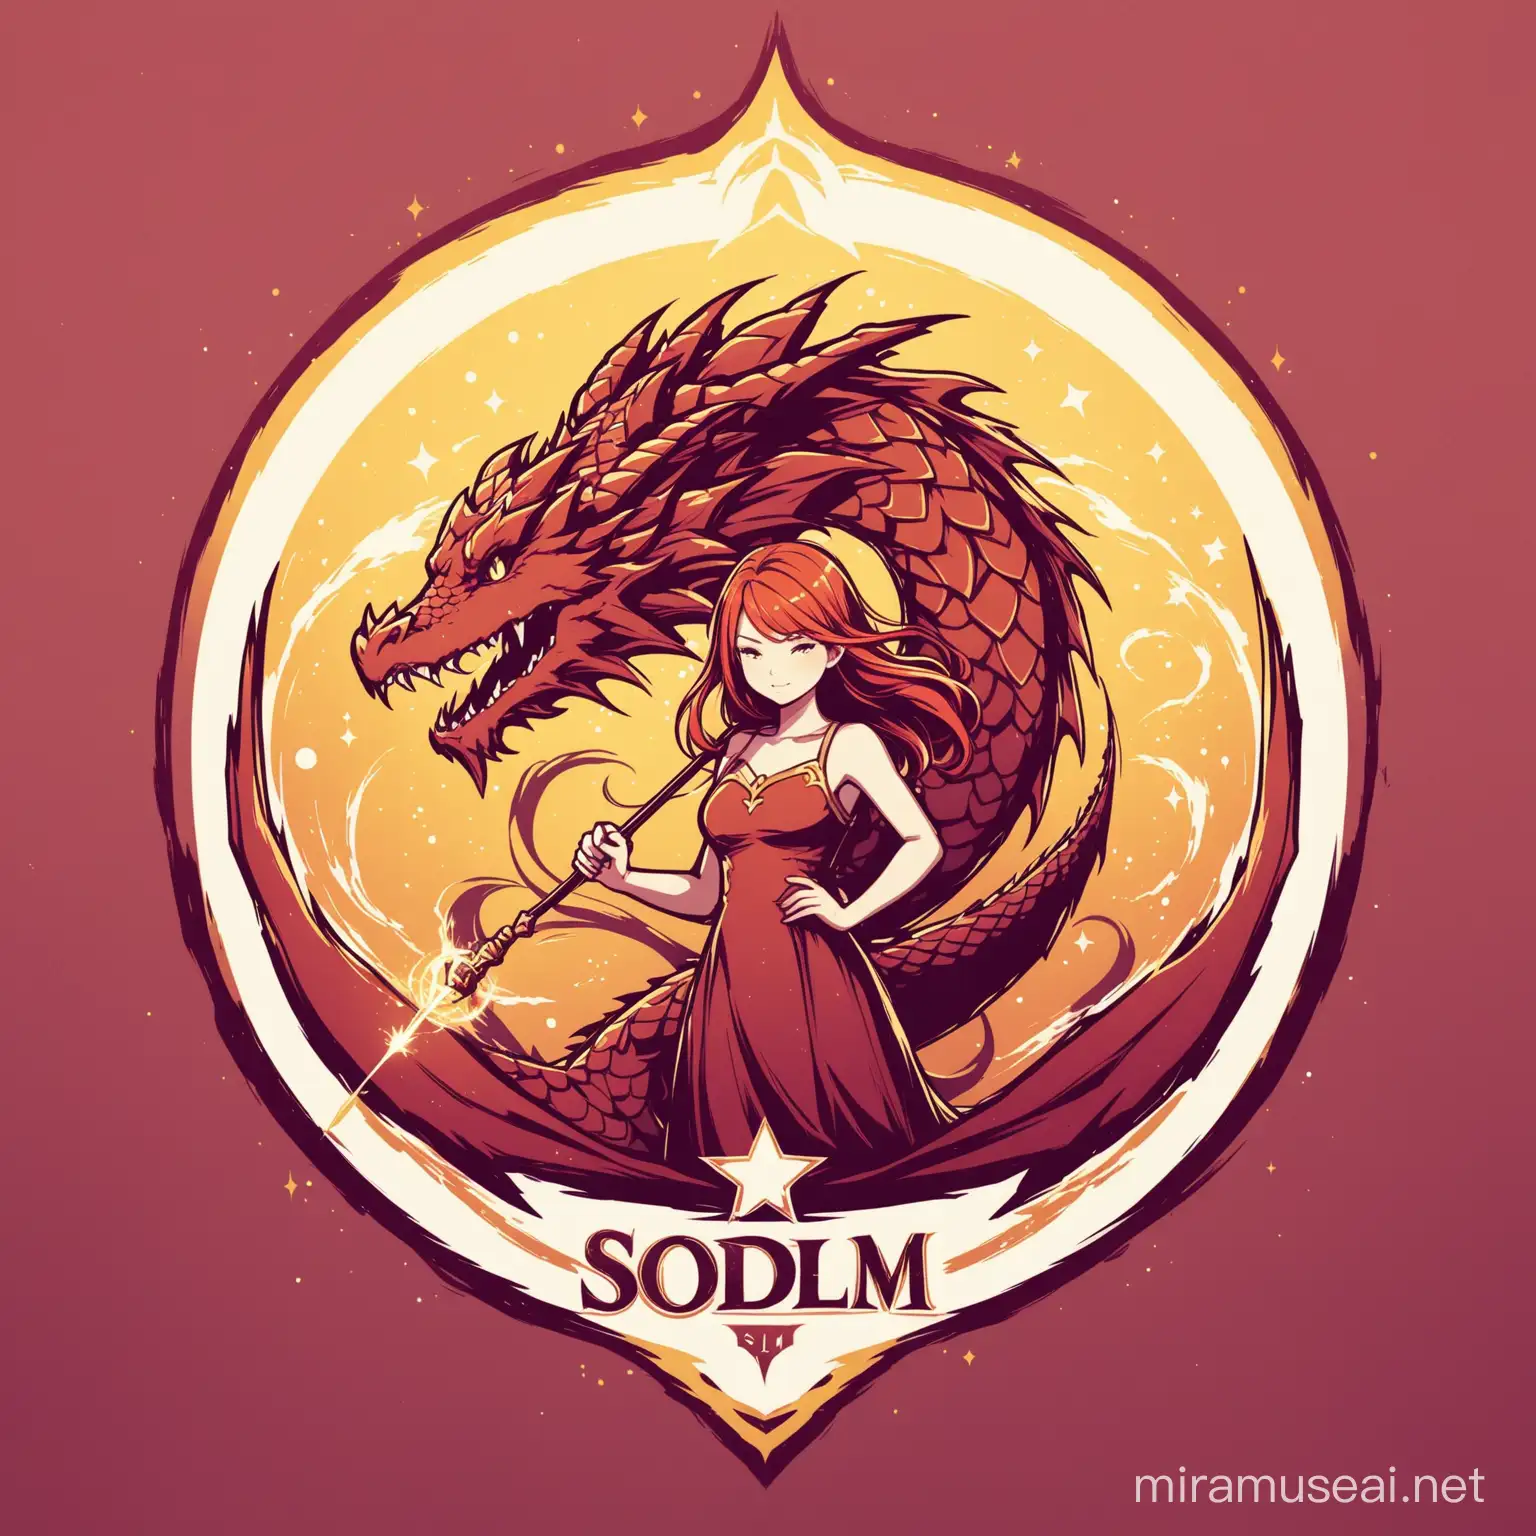 Fantasy Logo Design Girl with Wand and Dragon